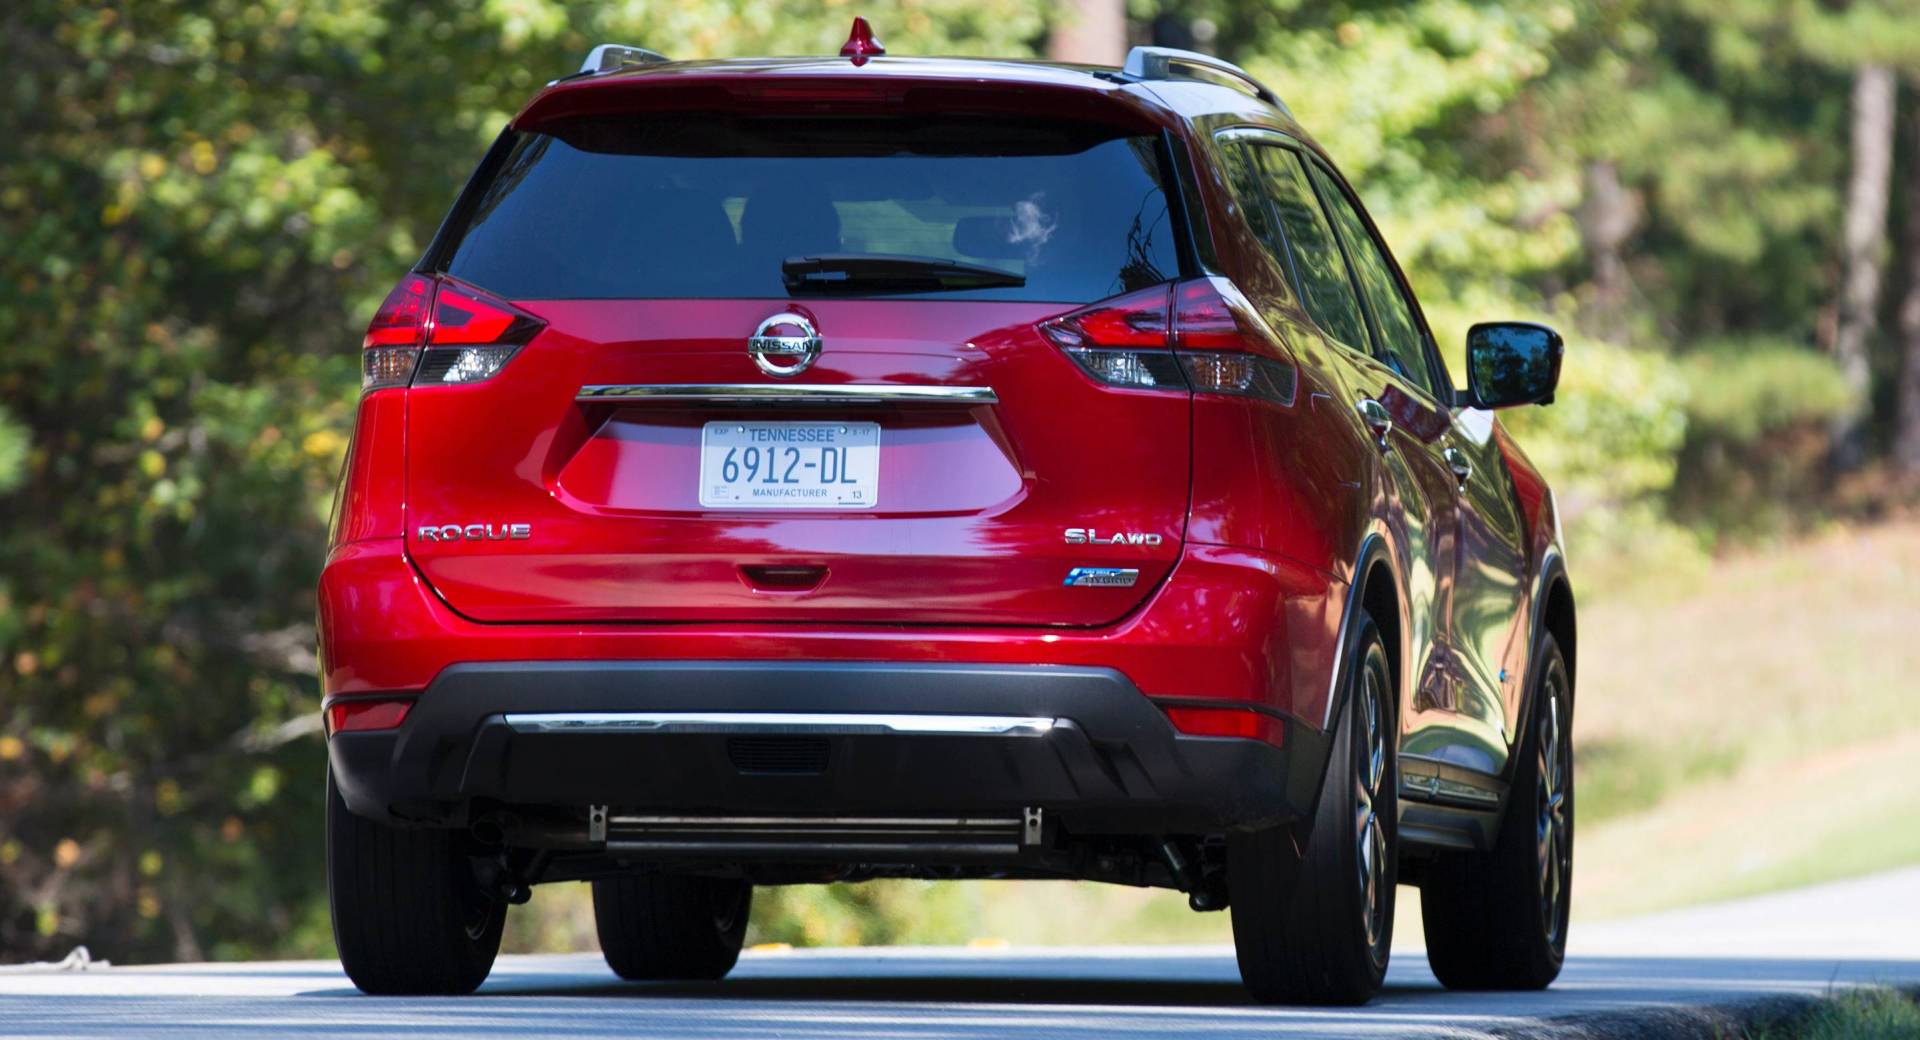 2020 Nissan Rogue Hybrid Axed From The U.S. Over Poor Sales | Carscoops